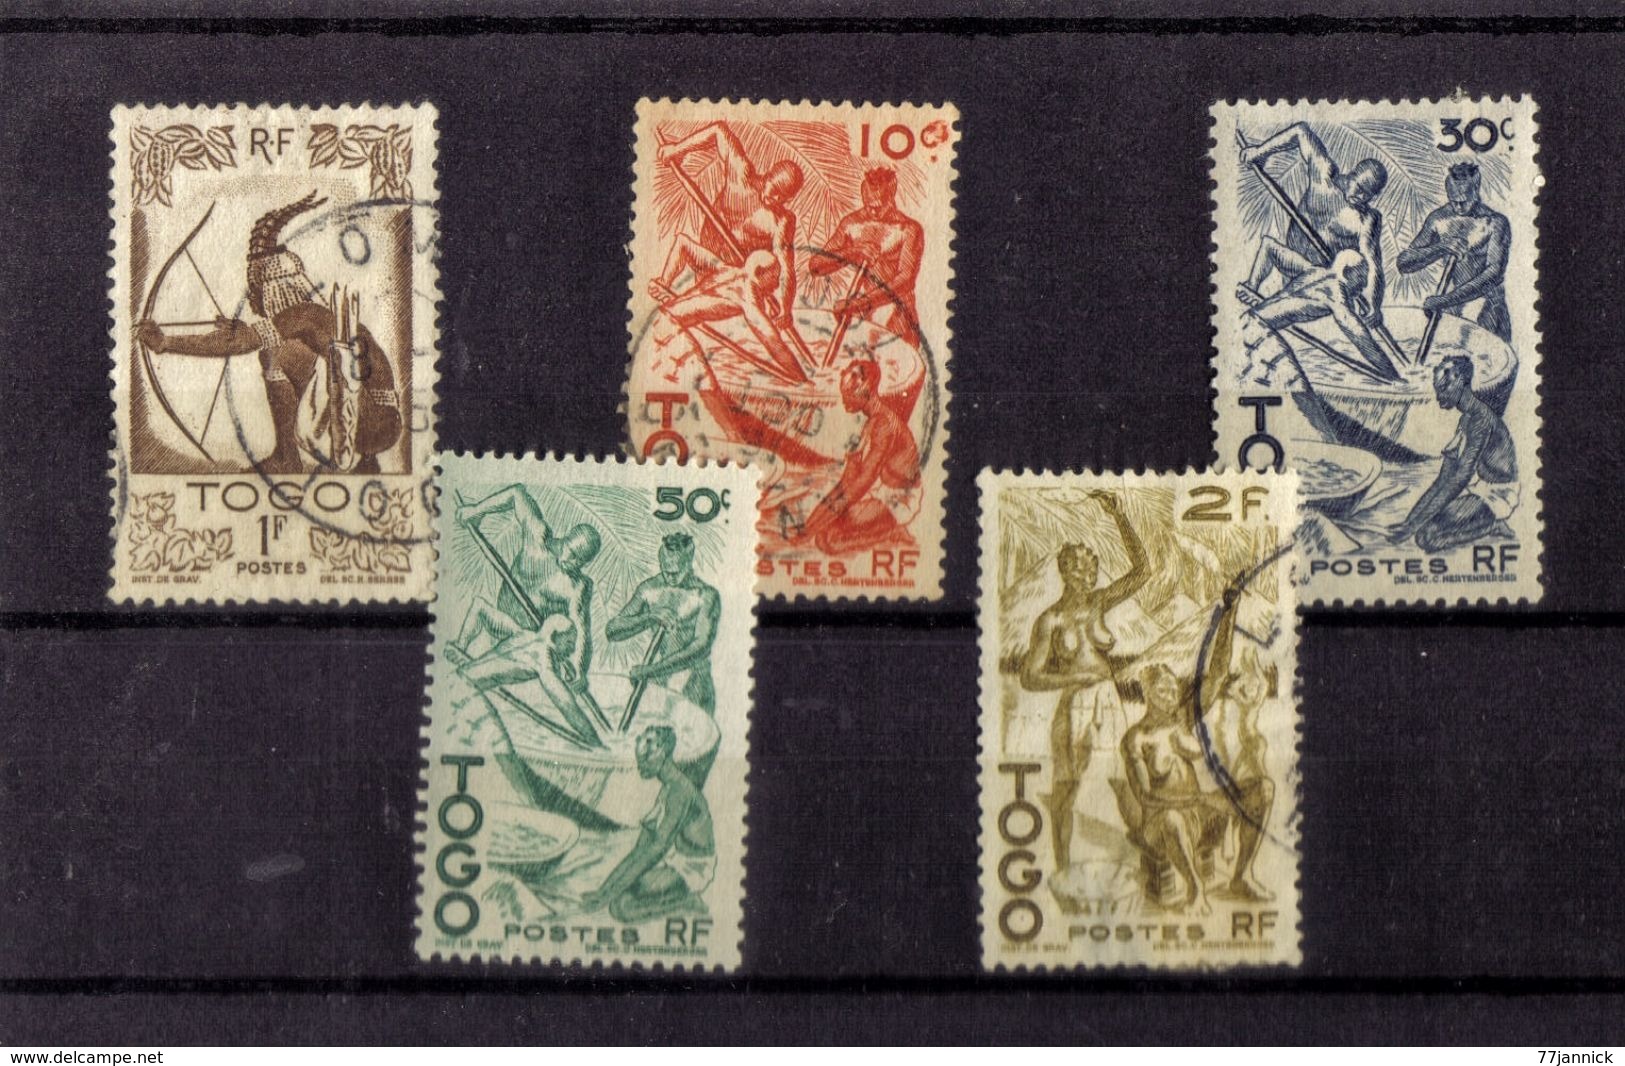 LOT DE TIMBRES NEUF* ET  OBLITERE - Used Stamps